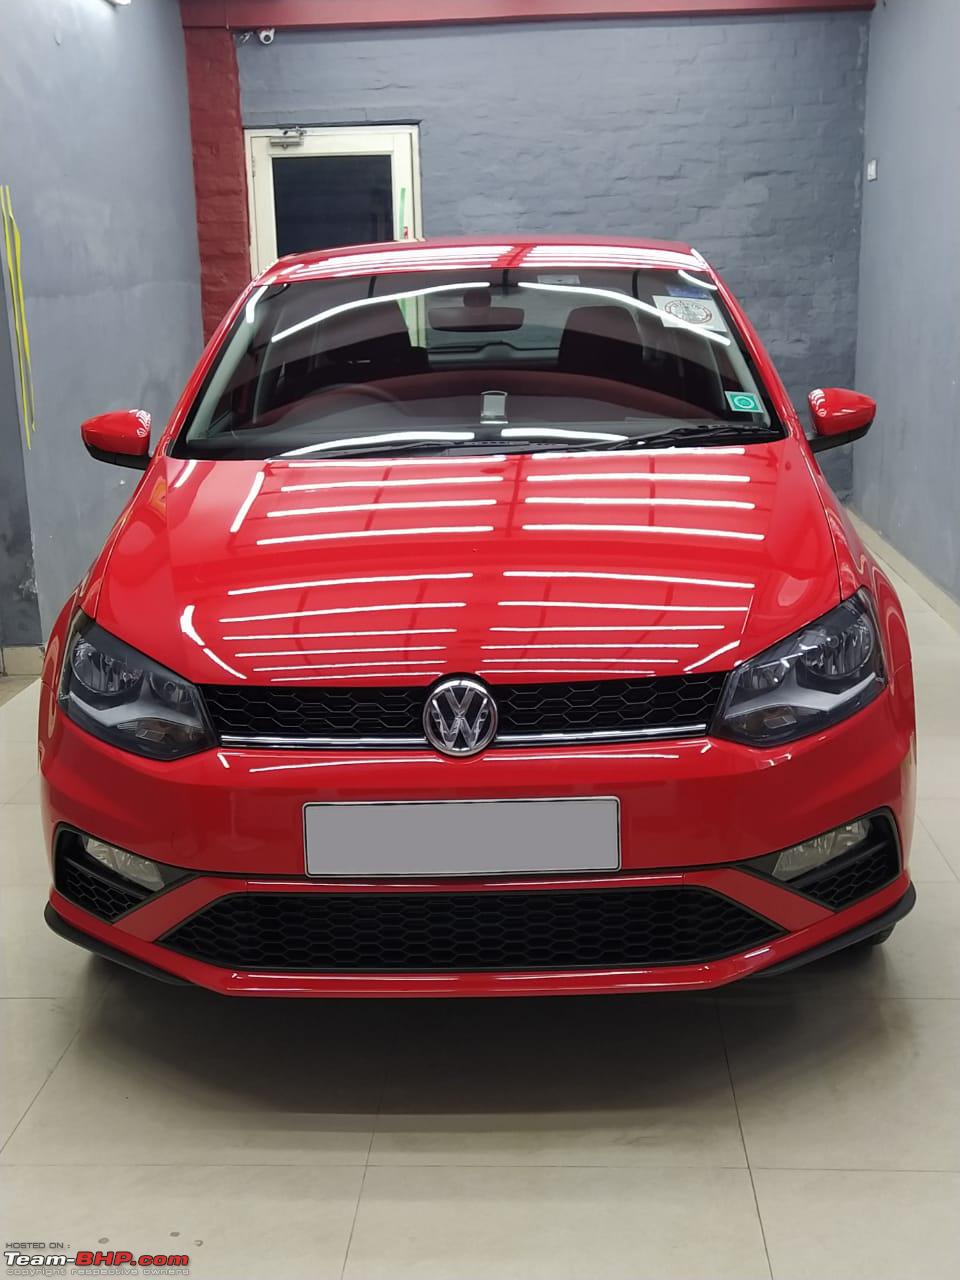 Normally Absorb embargo 4-months with a Volkswagen Polo 1.0 TSI - Team-BHP